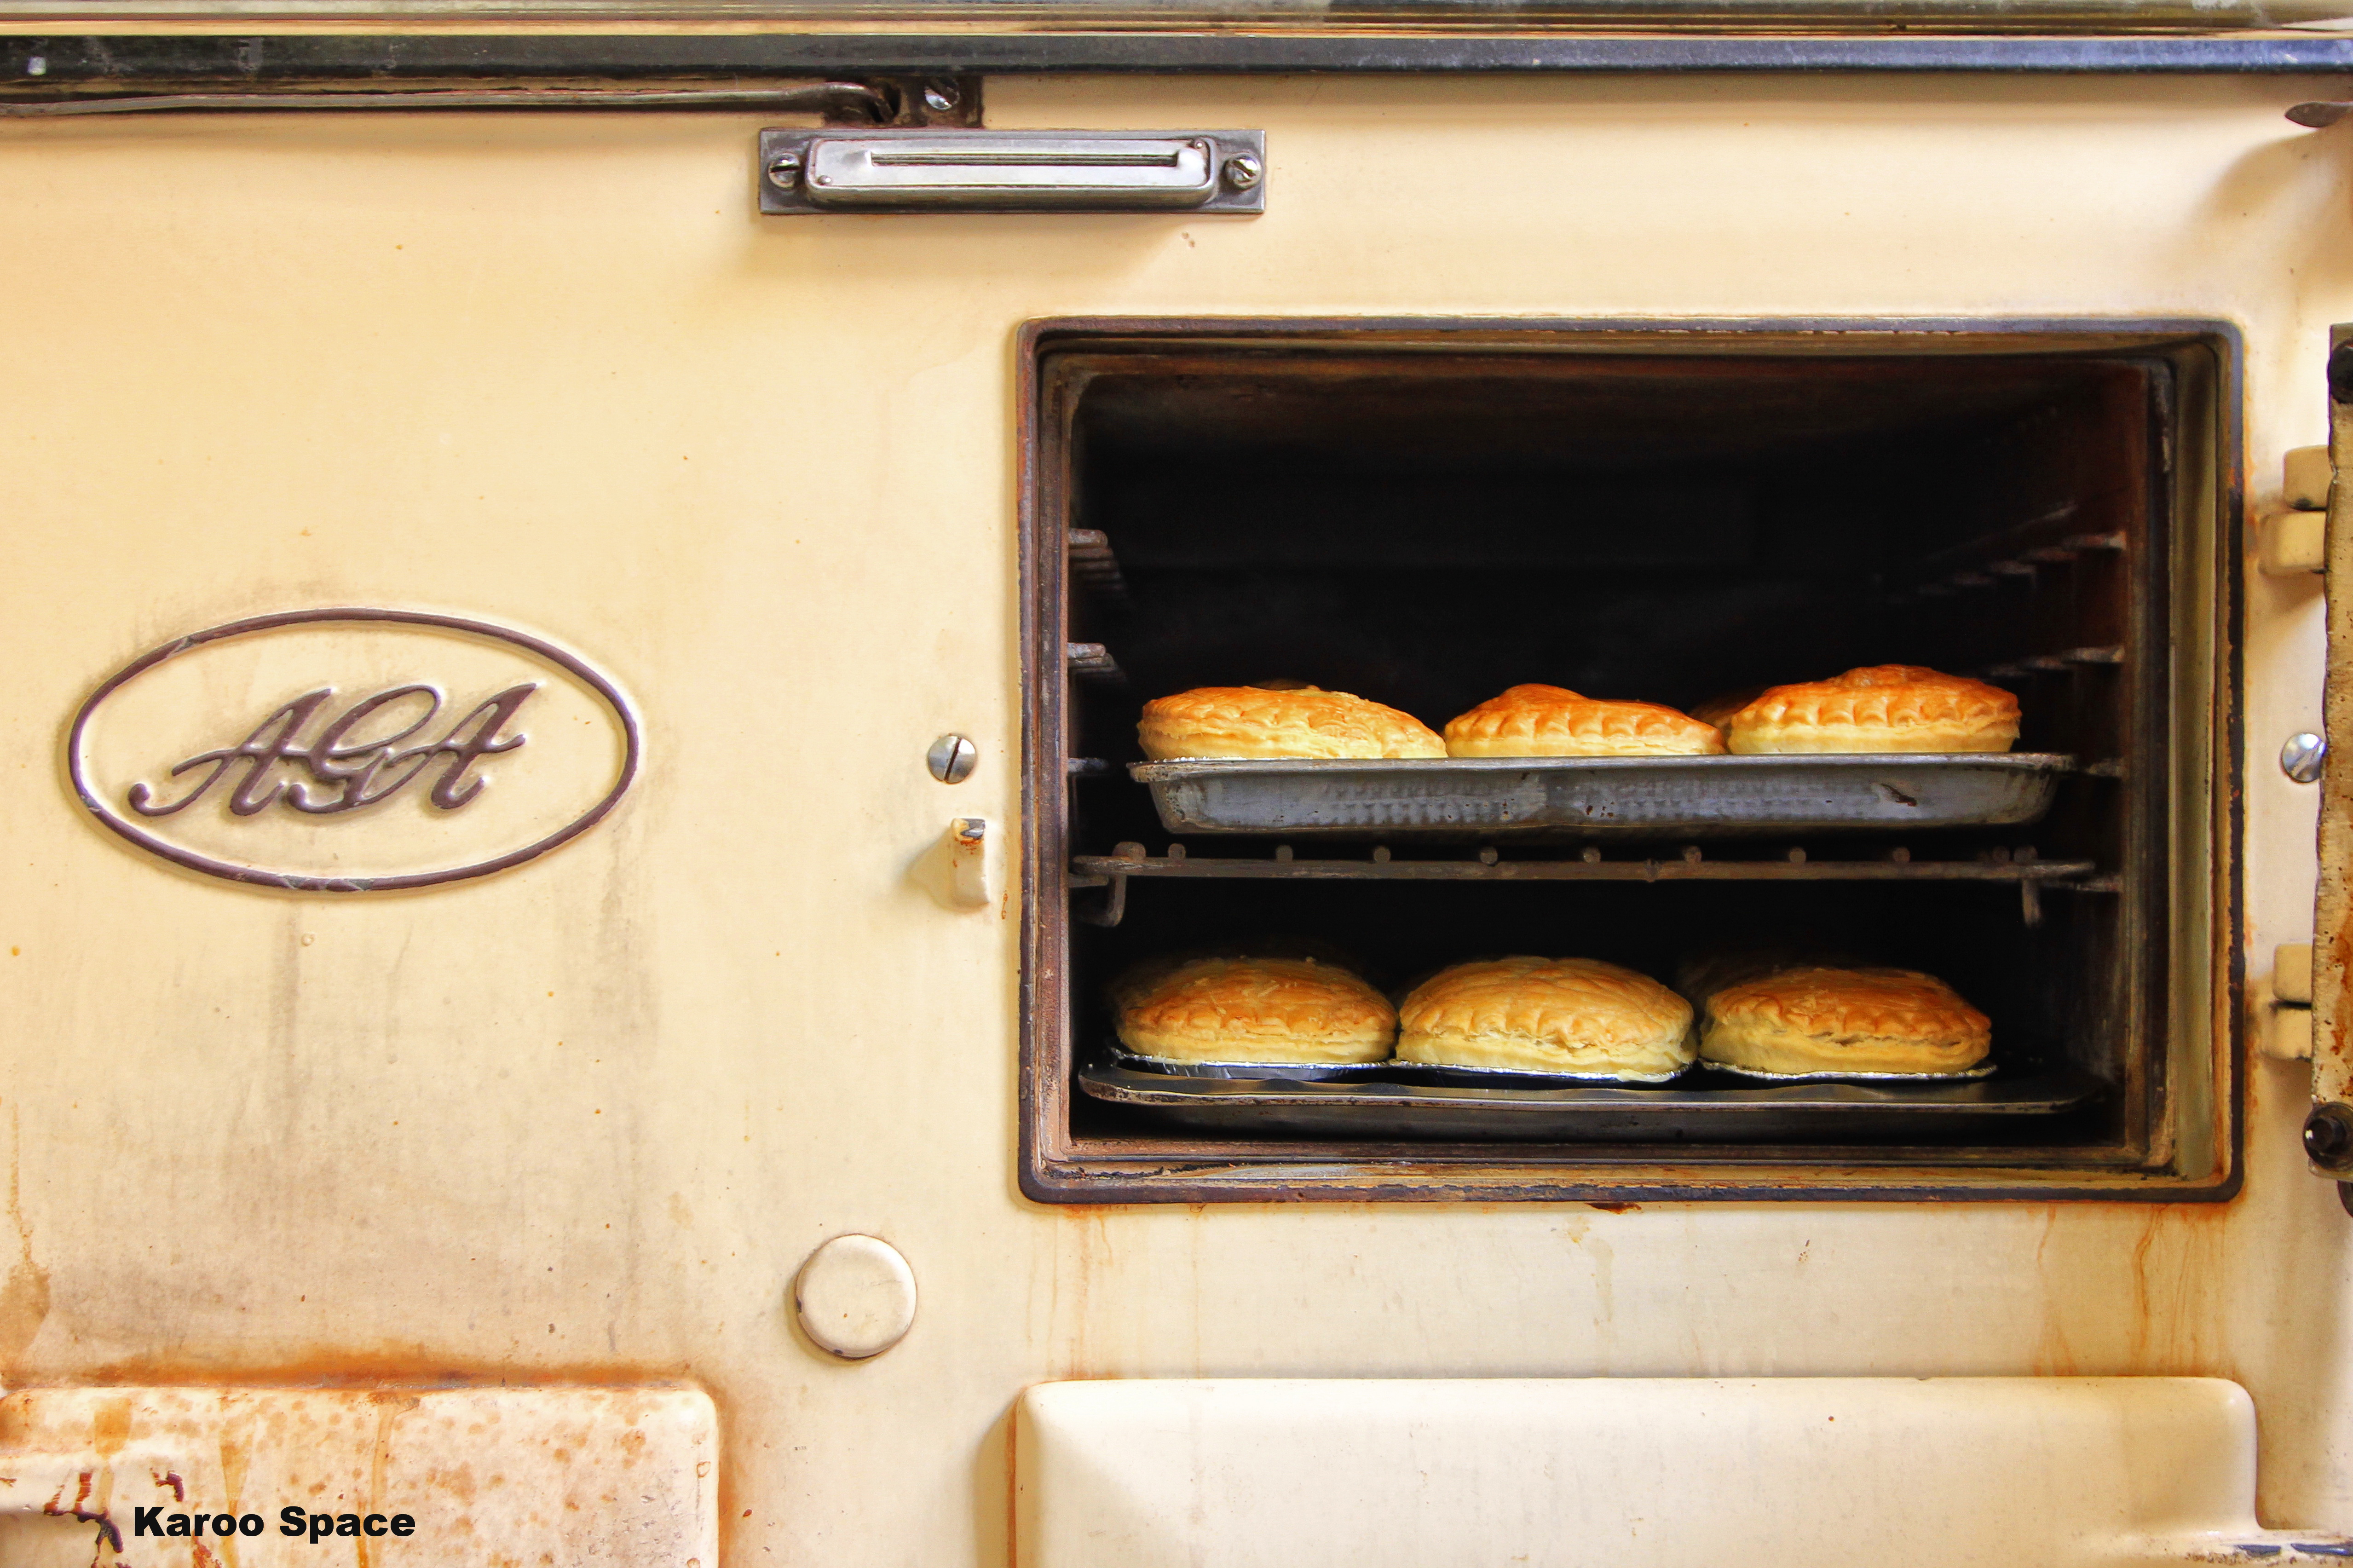 Fresh pies out of a Karoo Aga – what could be finer?